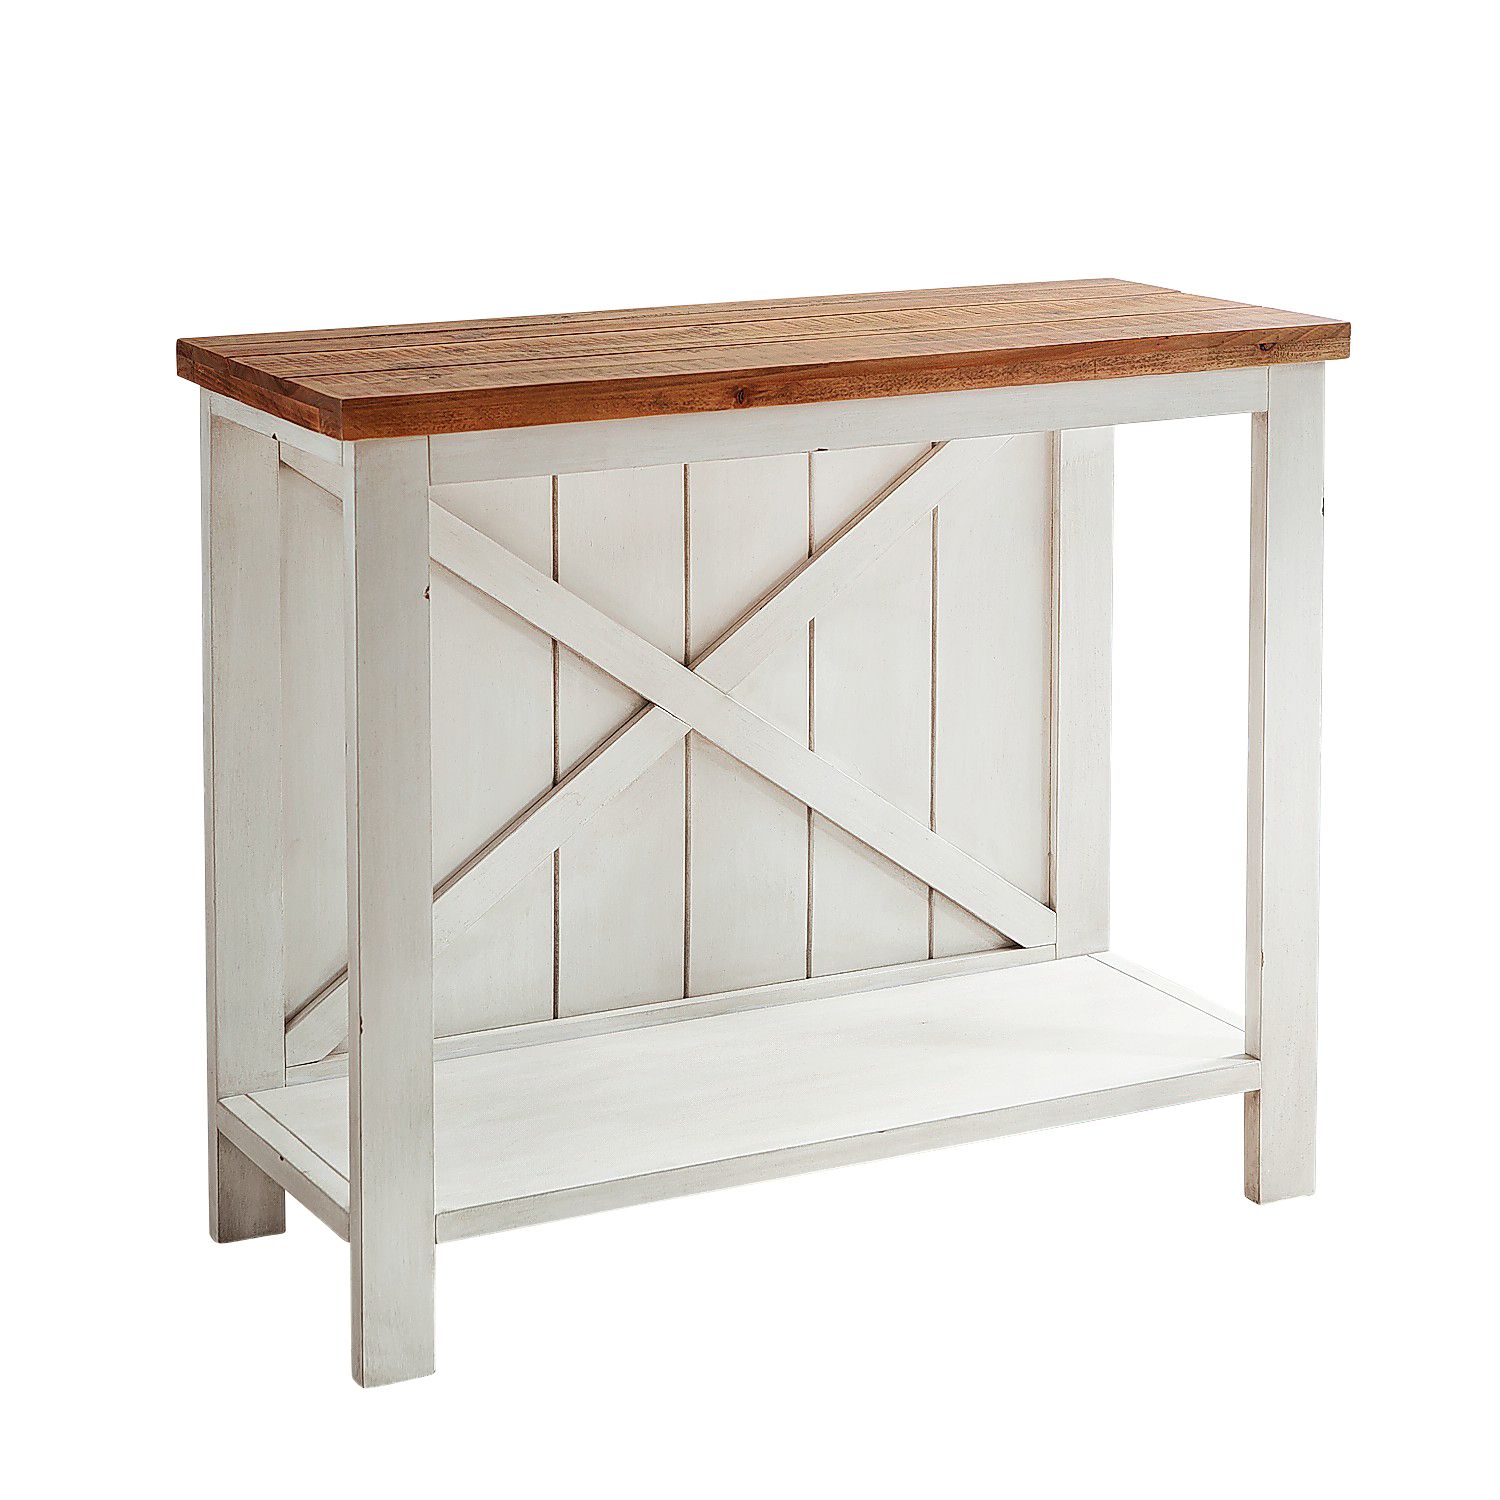 Farmhouse White Small Console Table – Pier1 Imports Pertaining To Oceanside White Washed Console Tables (View 15 of 20)